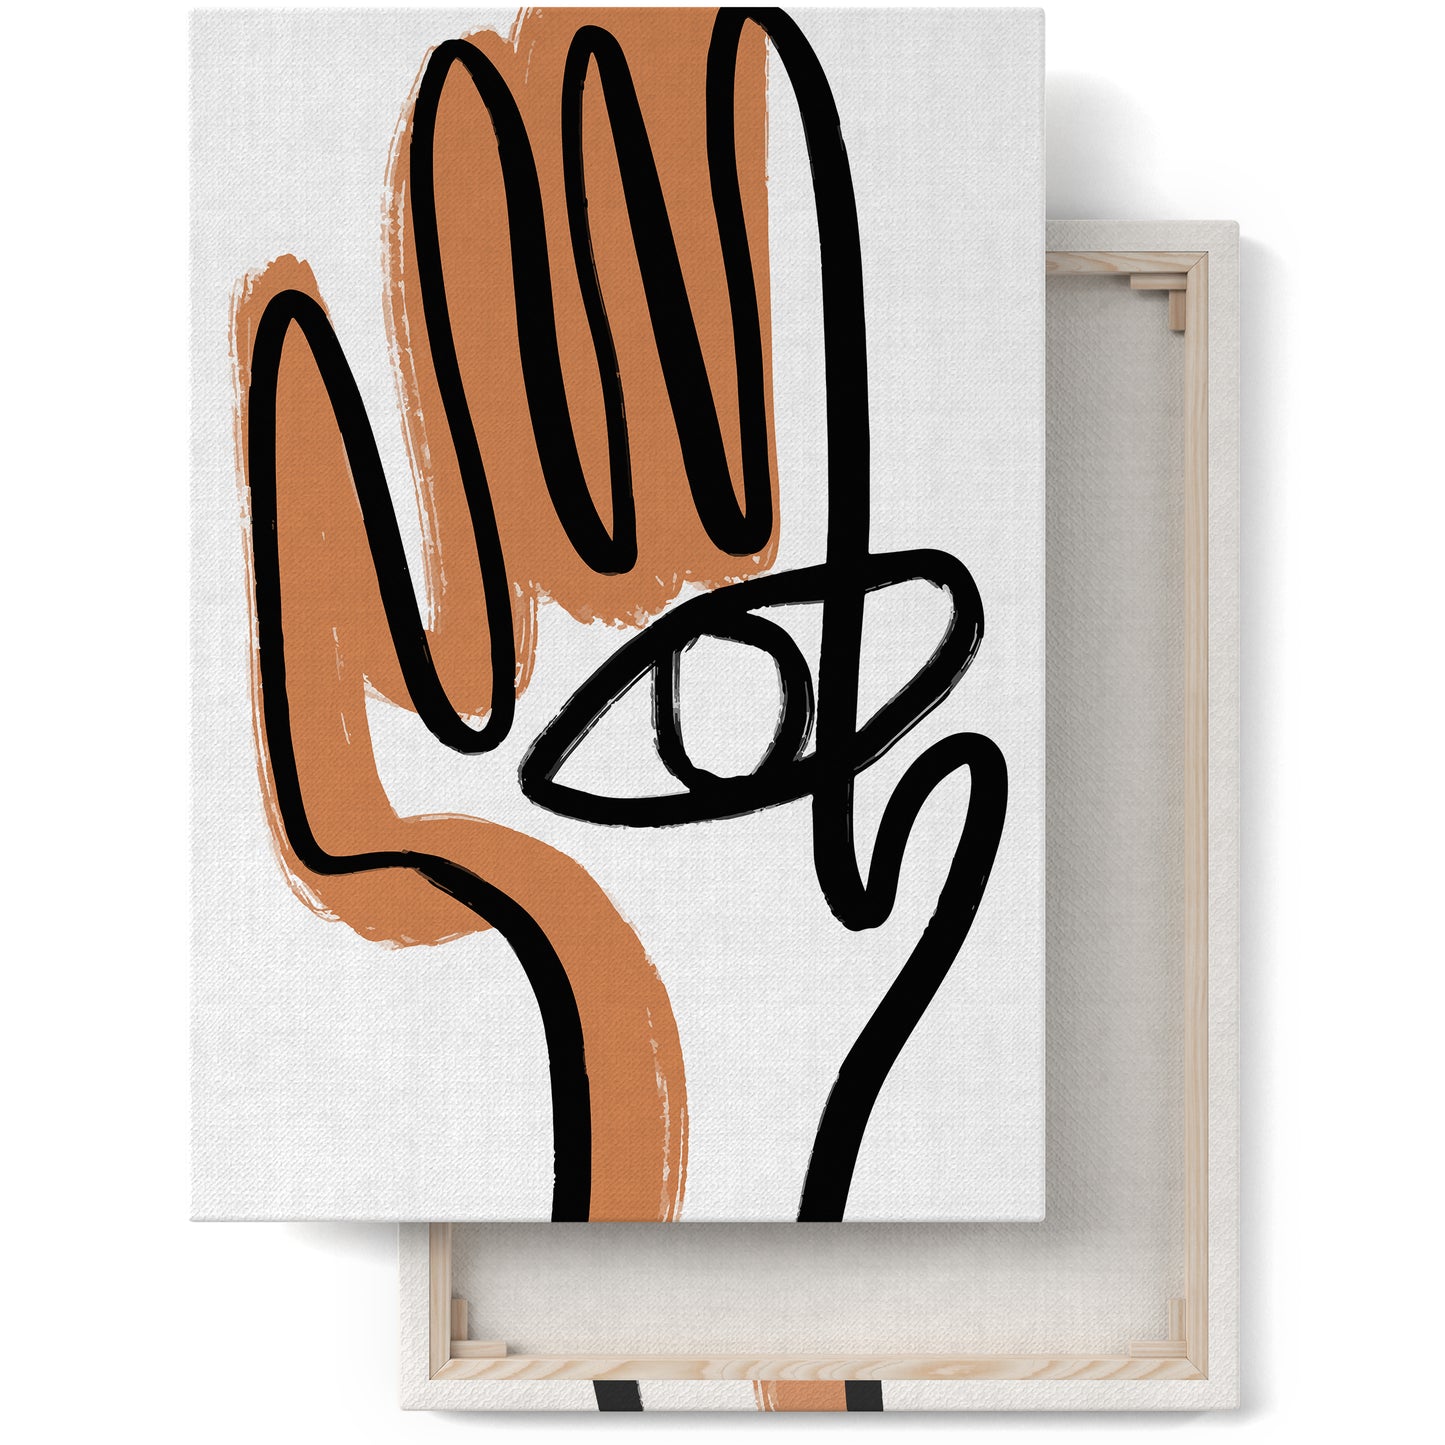 Picasso Cubism Inspired Canvas Print